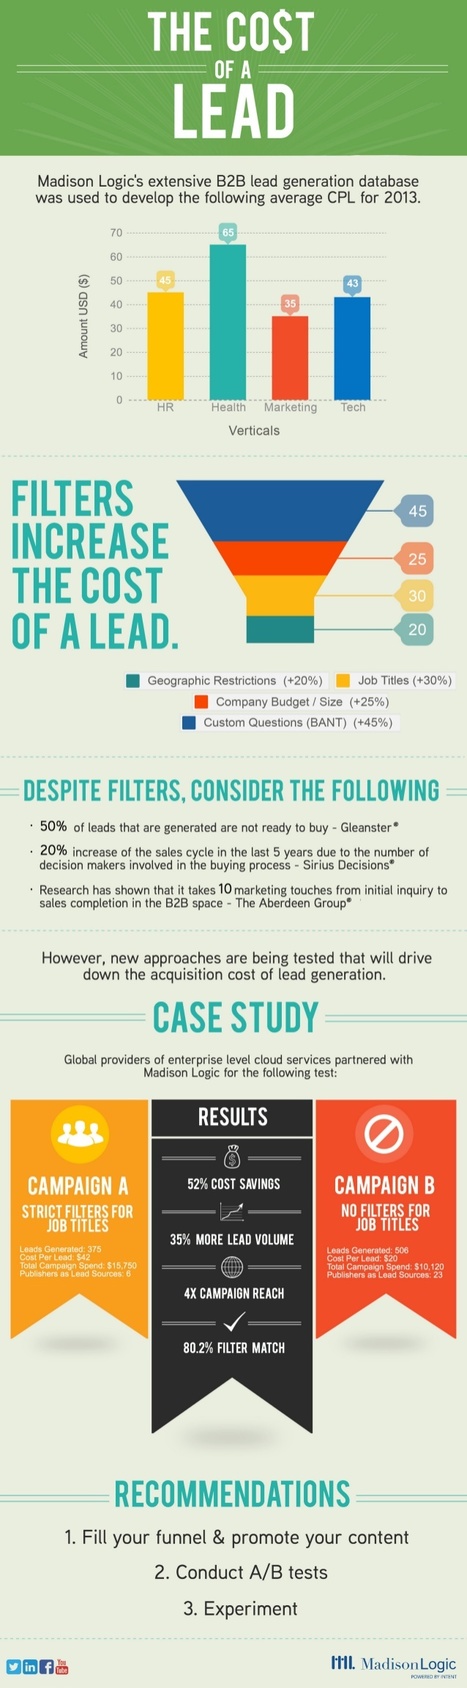 How Much Does A Lead Cost? [Infographic] | B2B Marketing Insider | #TheMarketingAutomationAlert | The MarTech Digest | Scoop.it